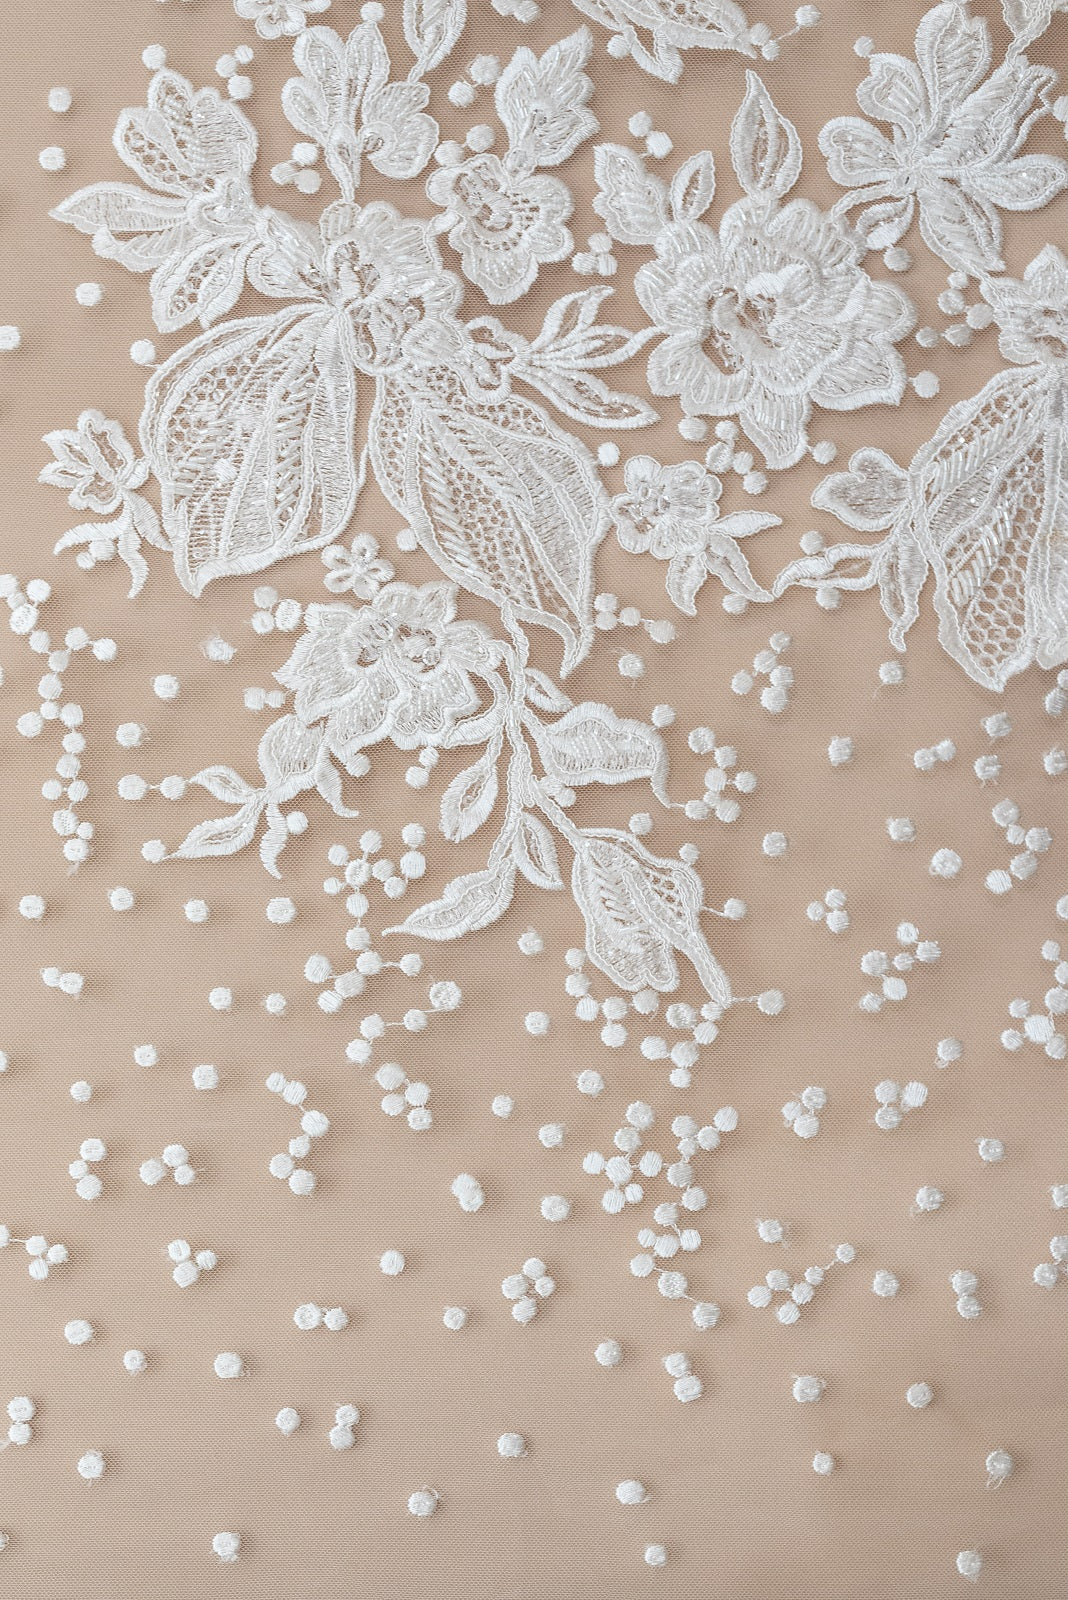 Ivory Lace with Floral Pattern and Polka Dots, with Crystals, Pearls and Sequins